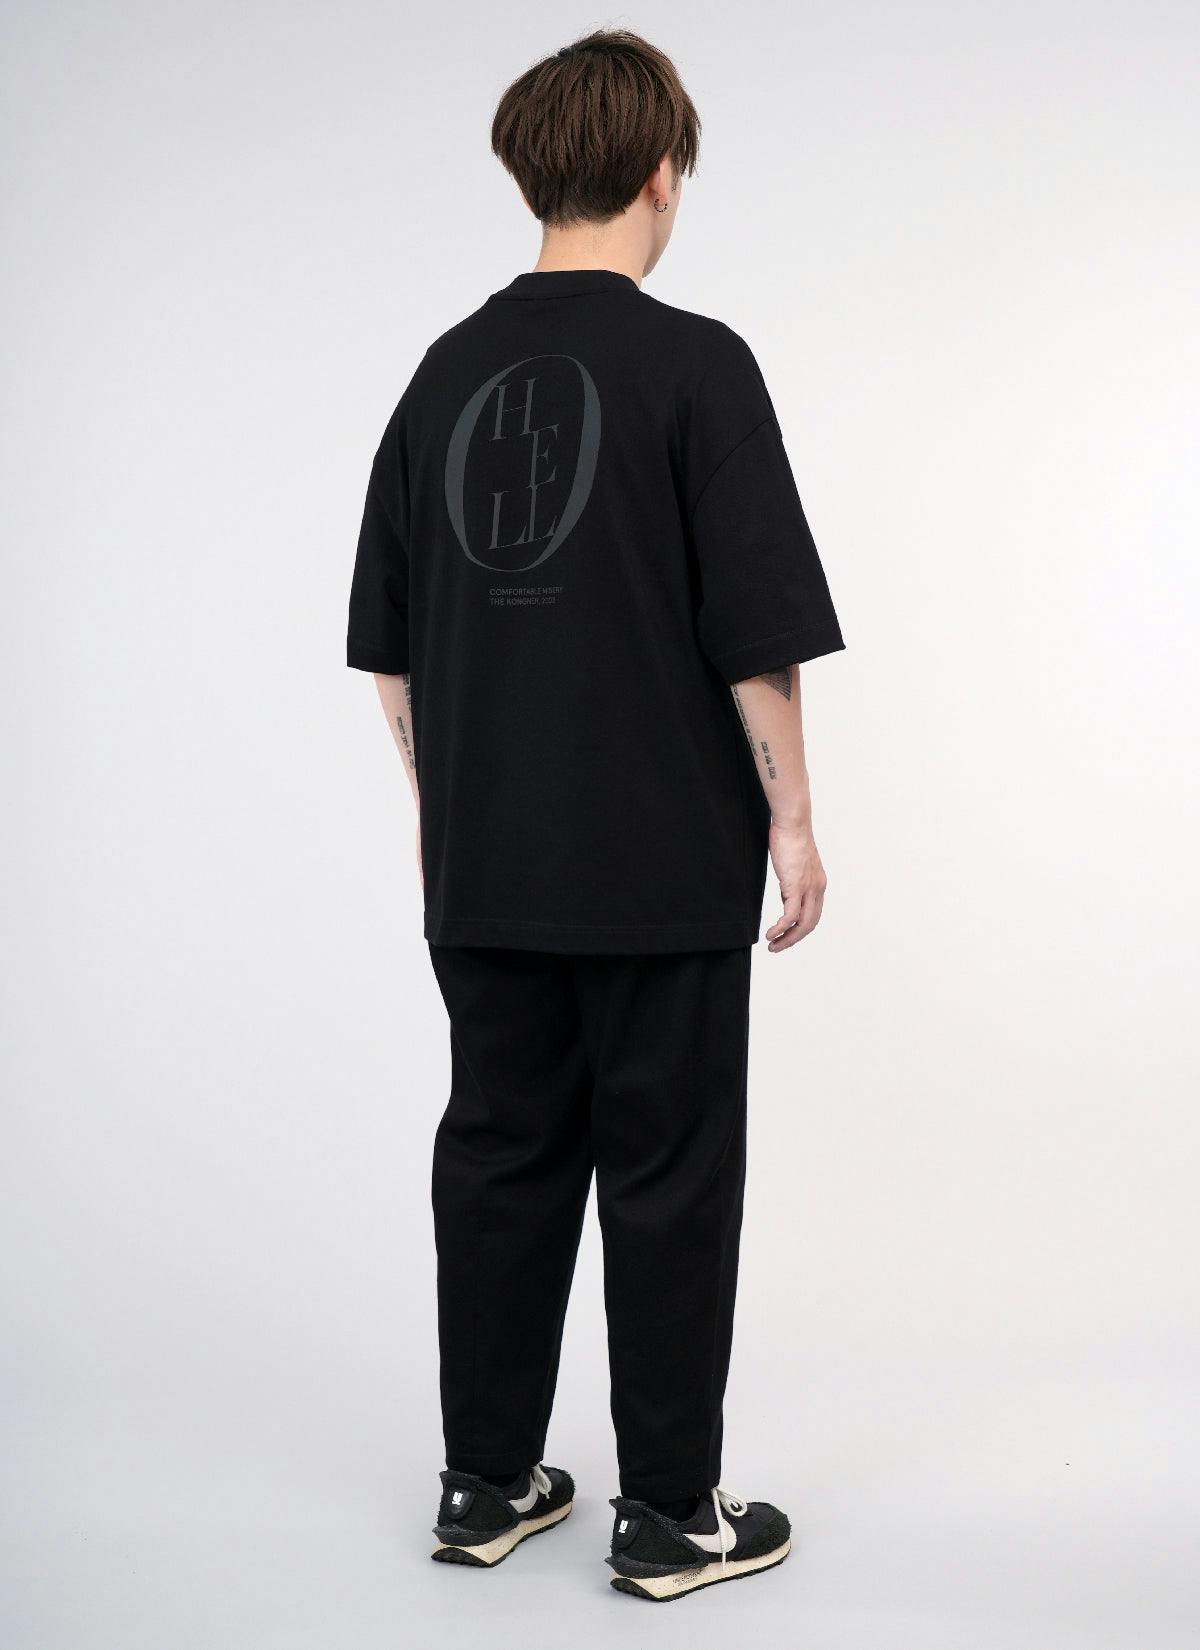 ˝ANEW˝  Relaxed T-Shirt Black/ Black